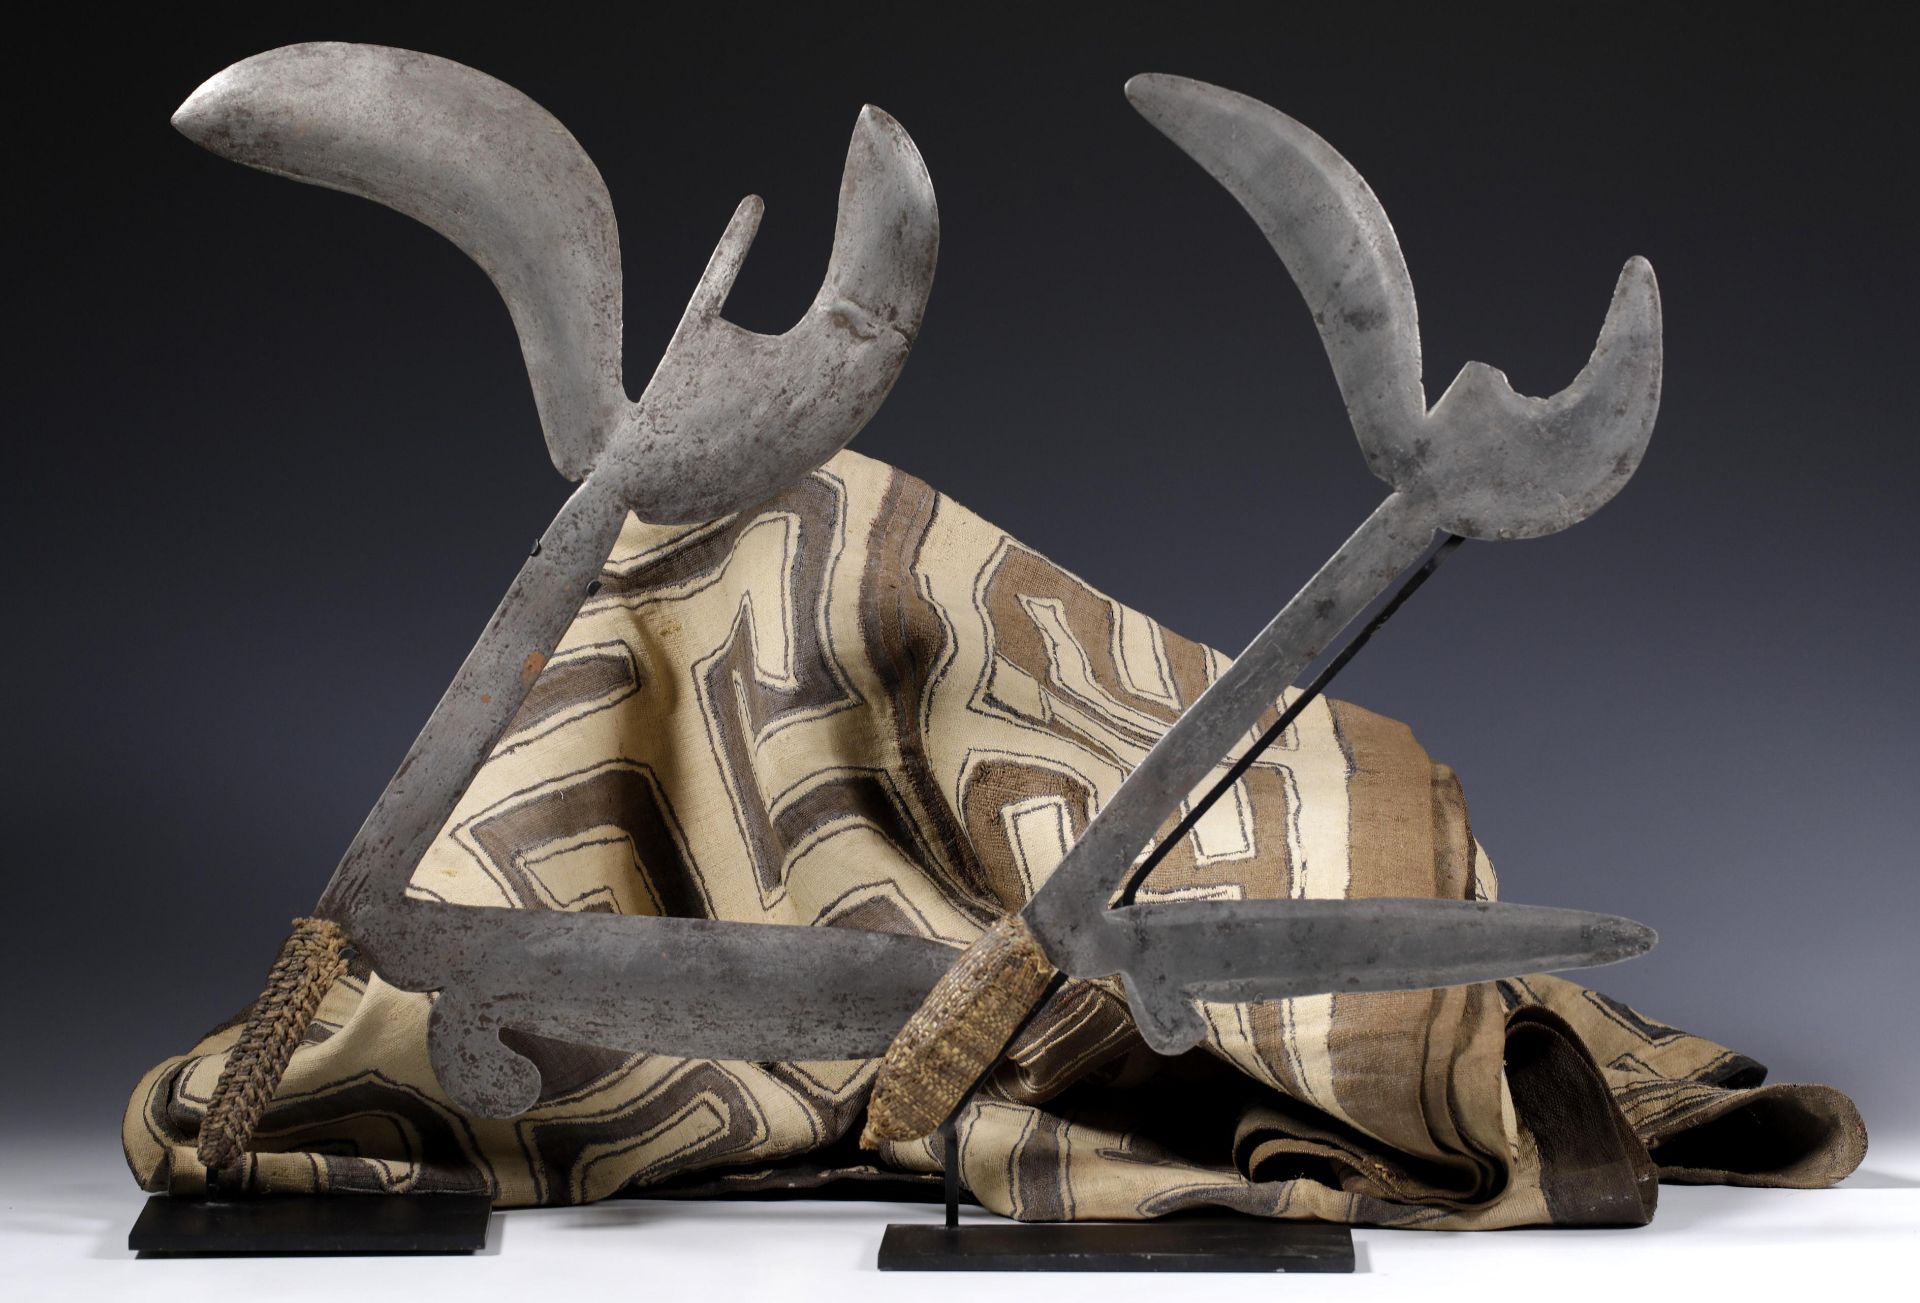 DRC., Zande, two throwing knifes